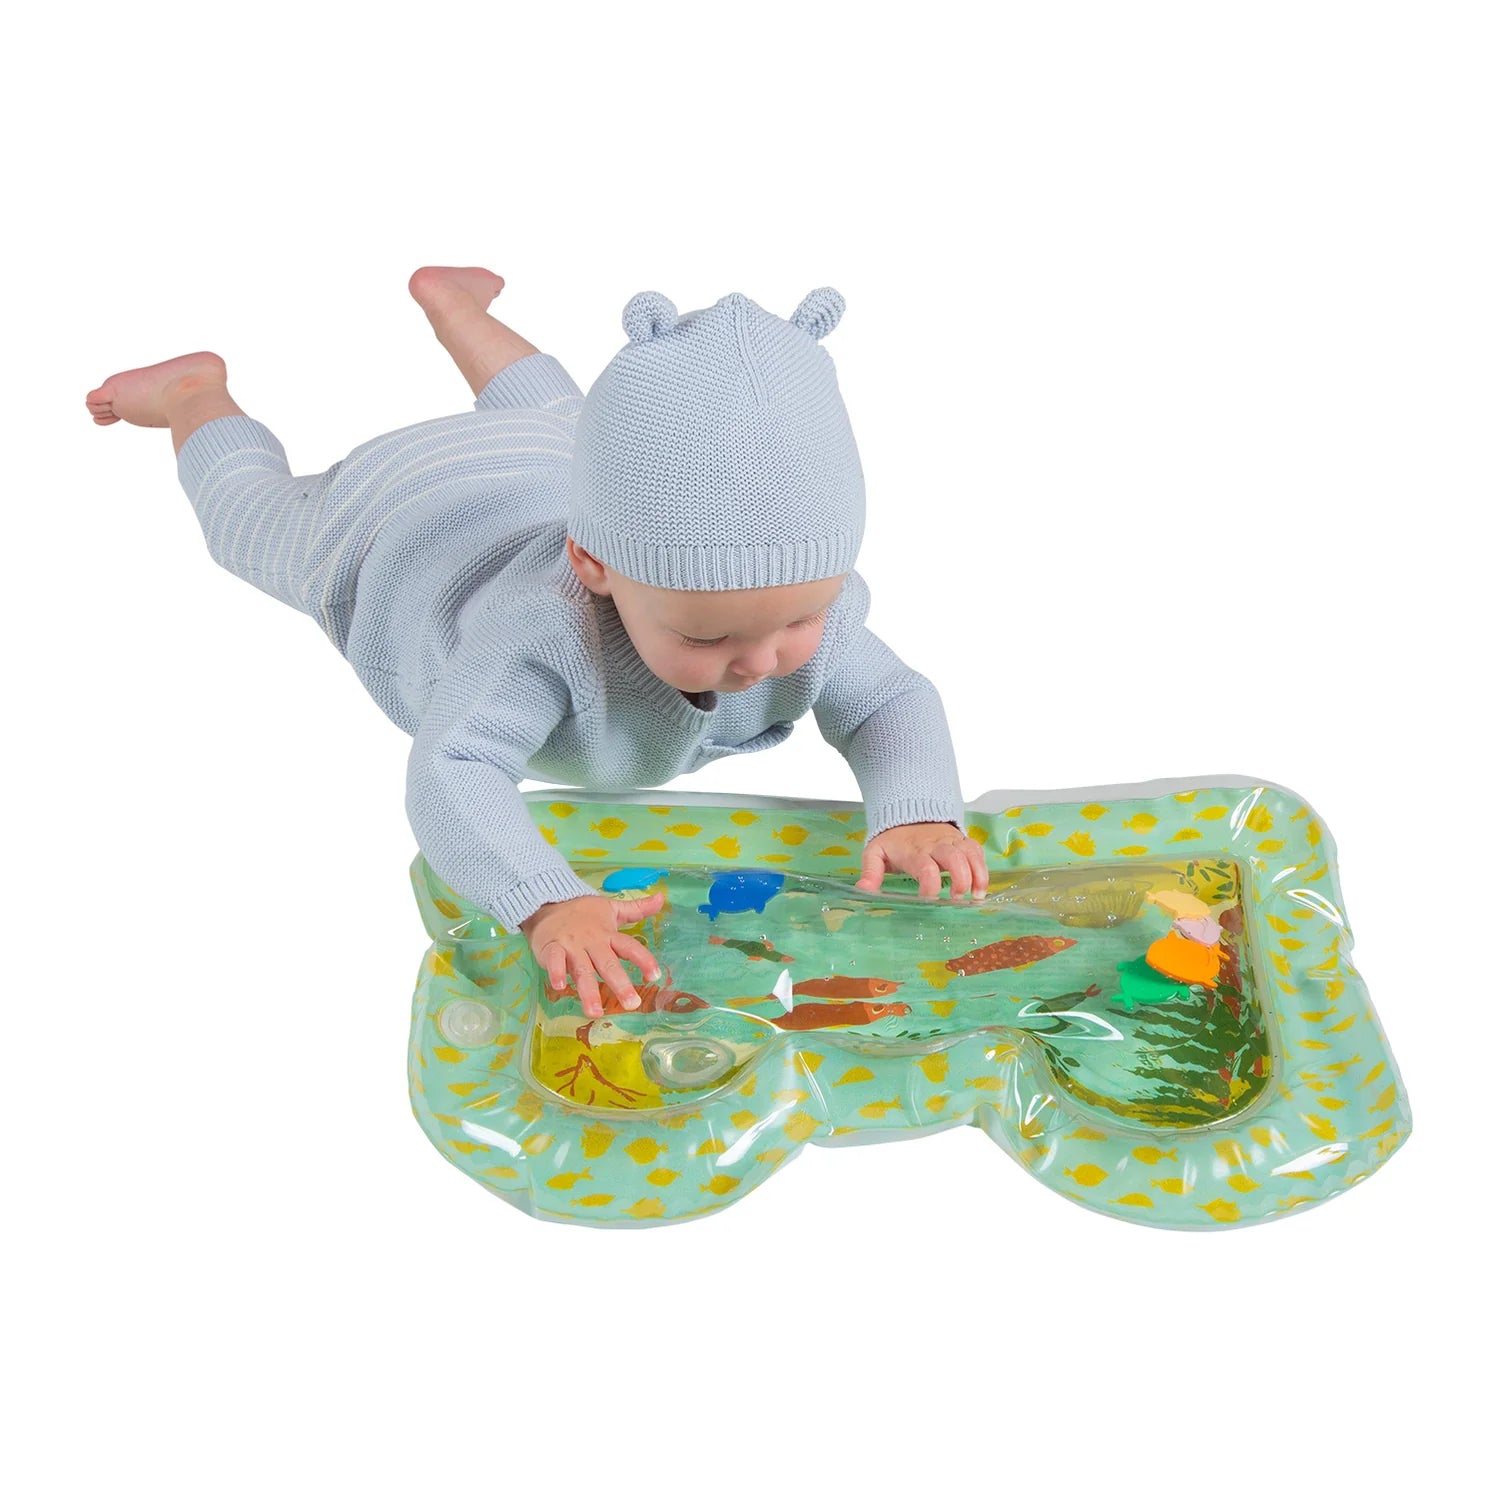 Manhattan Toy Riverbend Infant Tummy Time Water Mat